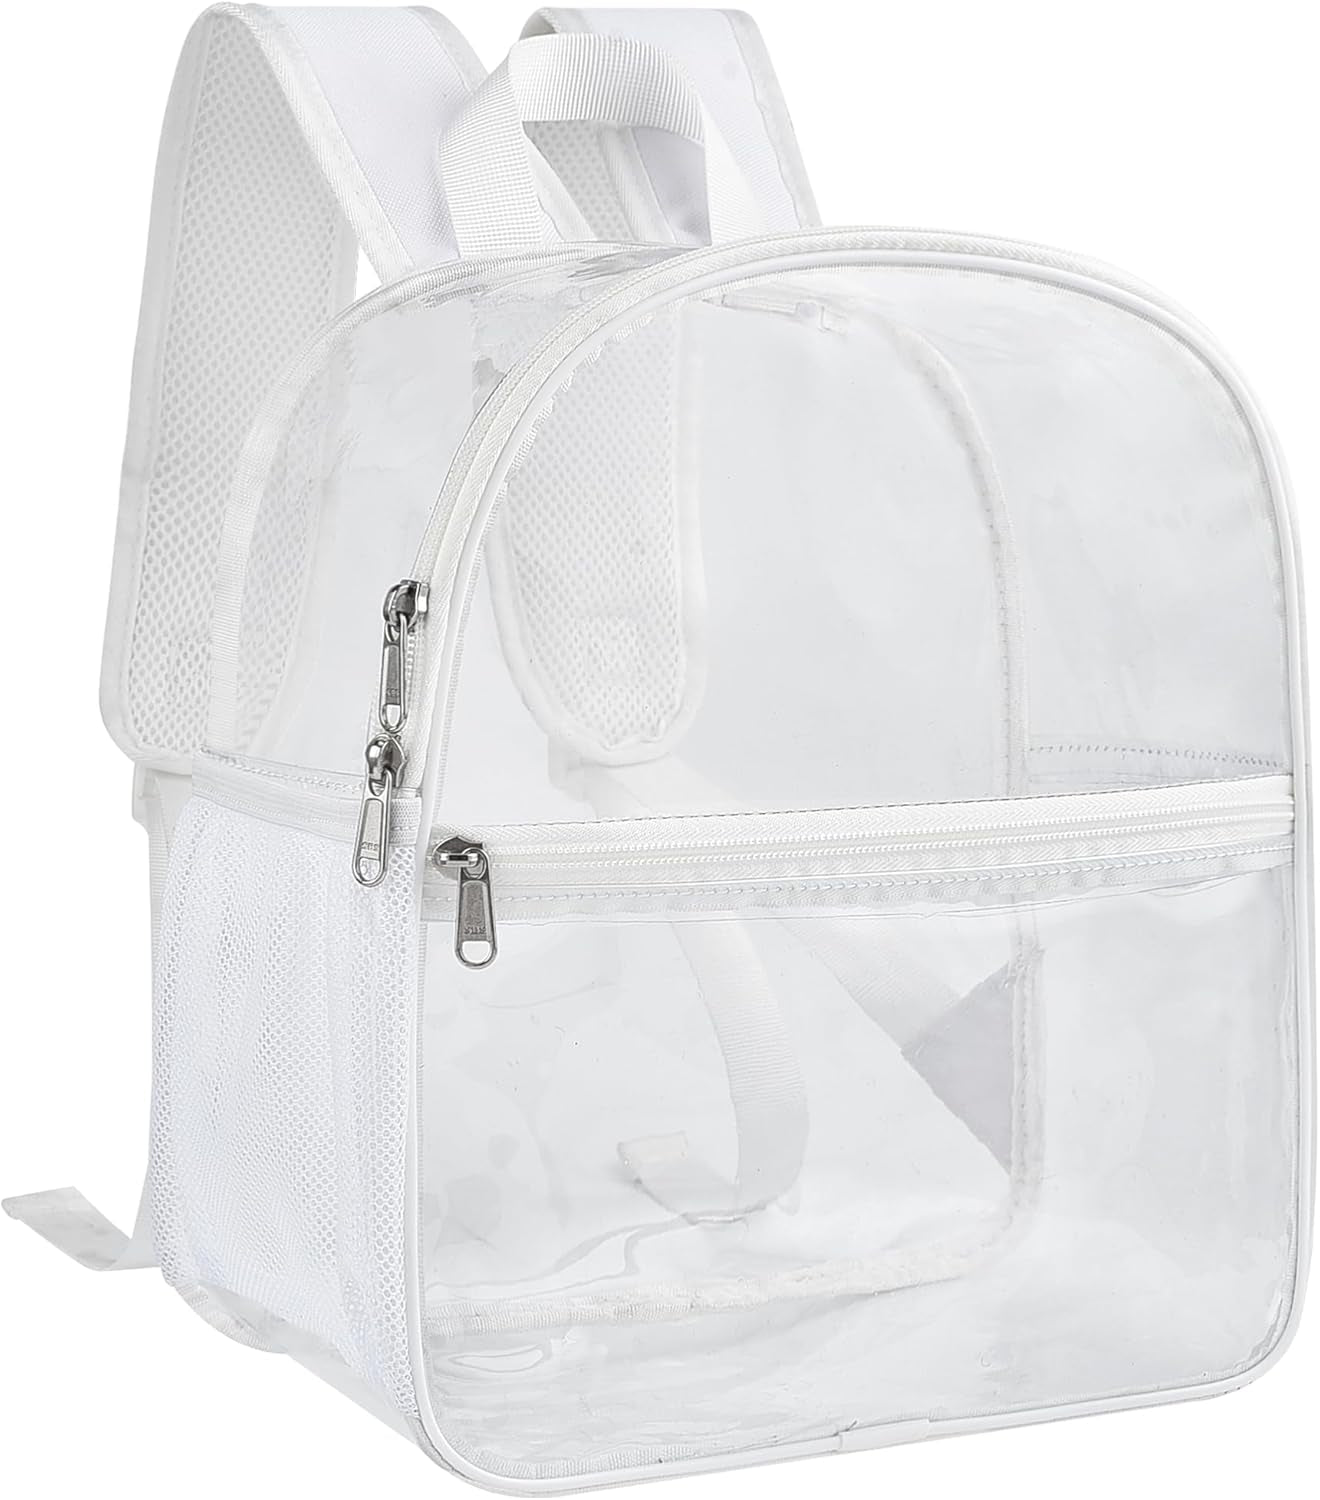 Clear Backpack Stadium Approved 12×12×6 with Reinforced and Wider Shoulder Straps, Small Clear Bag for Schools, Concerts, Work, Festivals and Sporting Events - Black